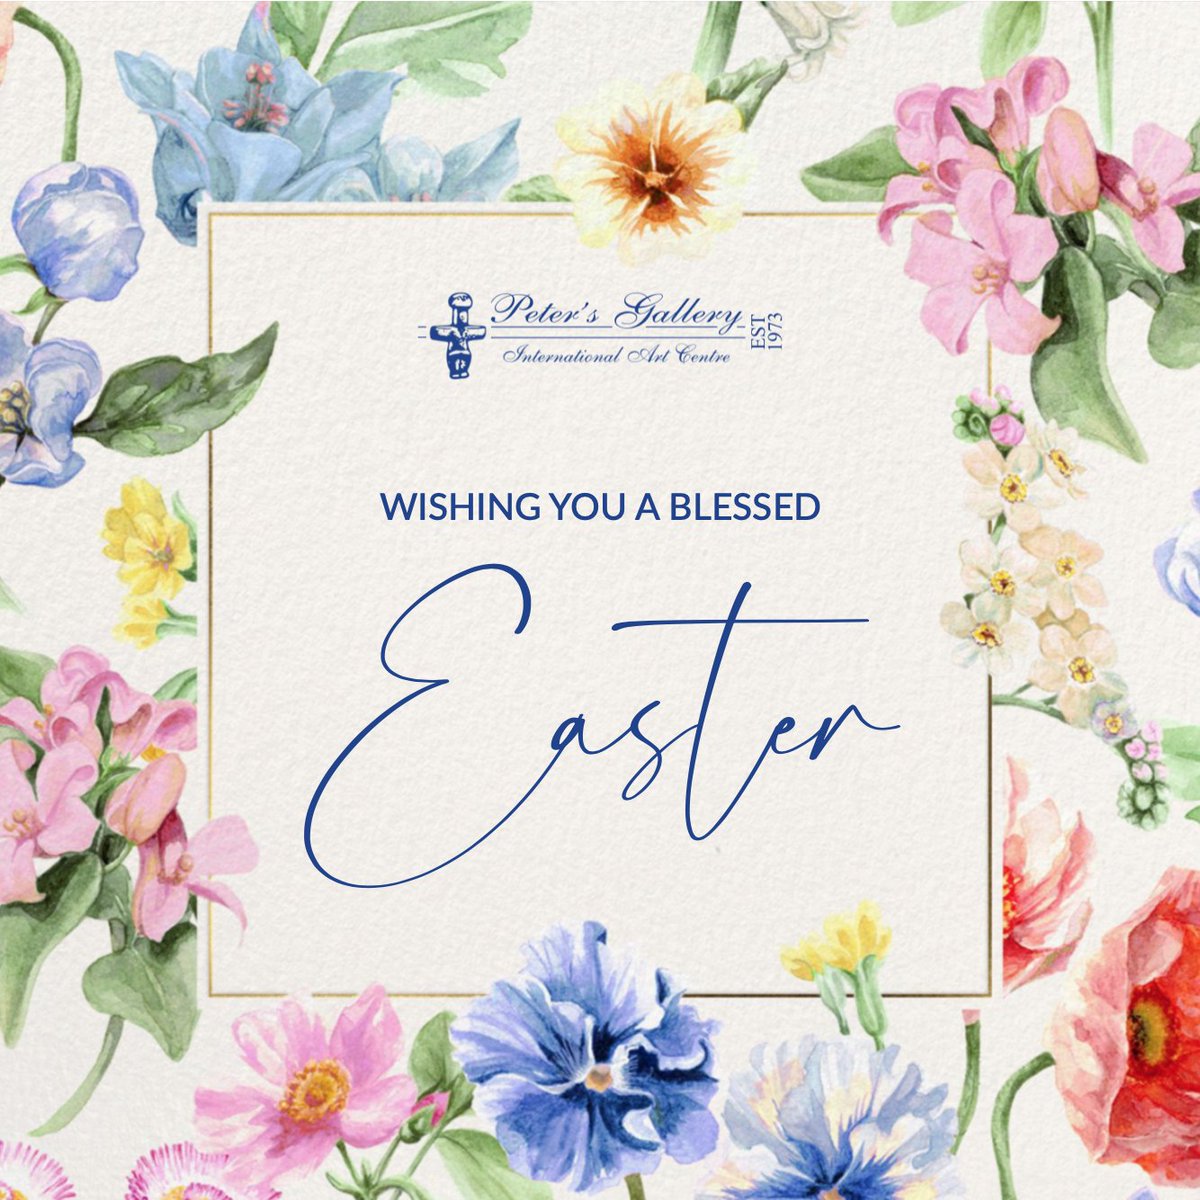 From all of us at Peter's Gallery, we wish you and your loved ones a joyous Easter filled with love, happiness, and plenty of your favorite Easter treats 🐣🌷

#PetersGallery #HappyEaster